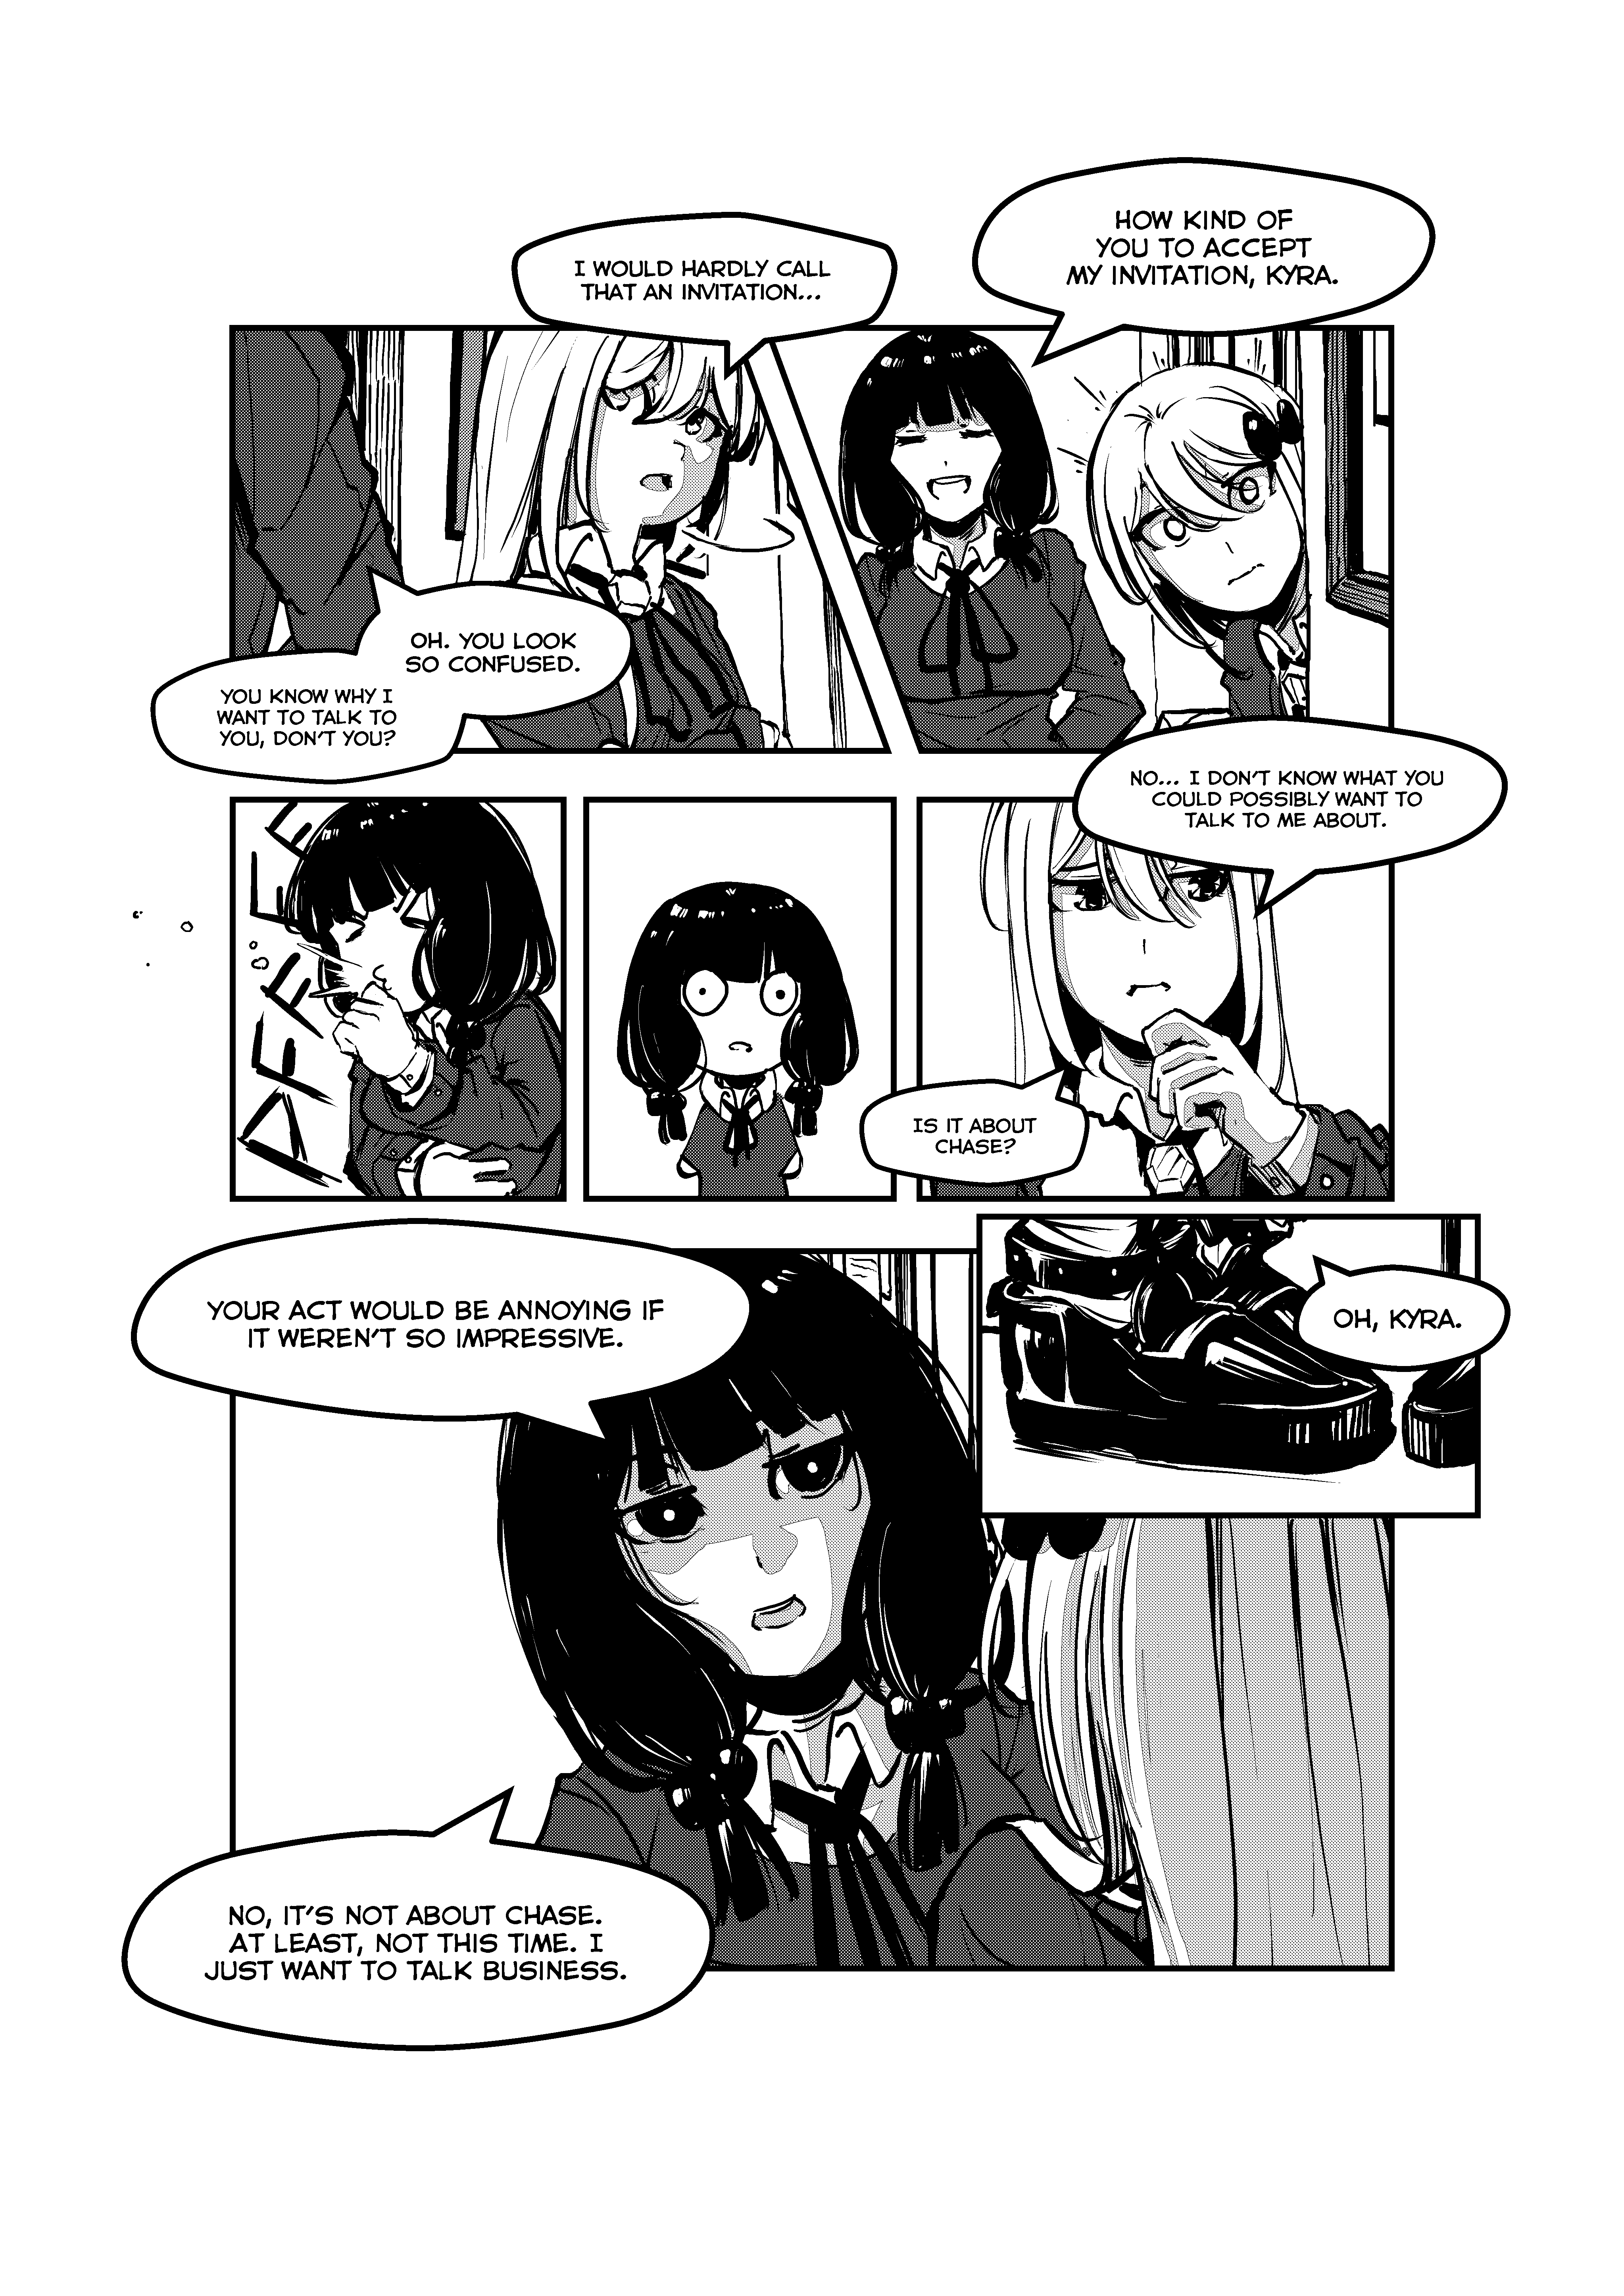 Opposites In Disguise - 21 page 9-44b9ab01